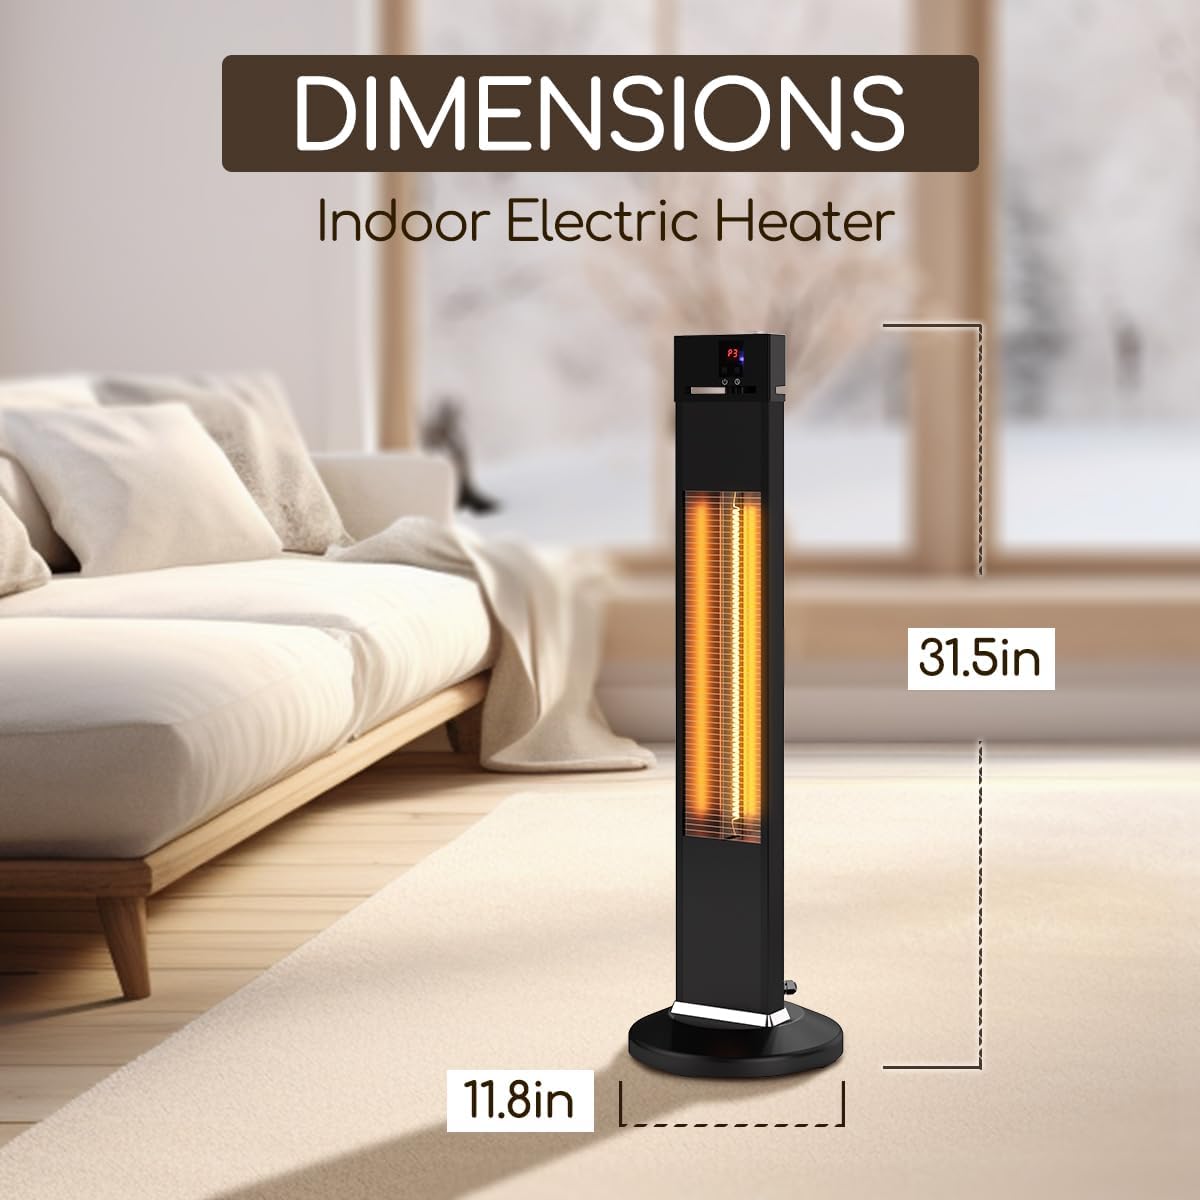 Portable Waterproof Tower Space Heater for Bathroom, Office, Garage, Backyard, 1500W Carbon Fiber Tub Electric Heater with 24H Timers, 3 Heat Levels Tip-Over and Overheat Protection Remot